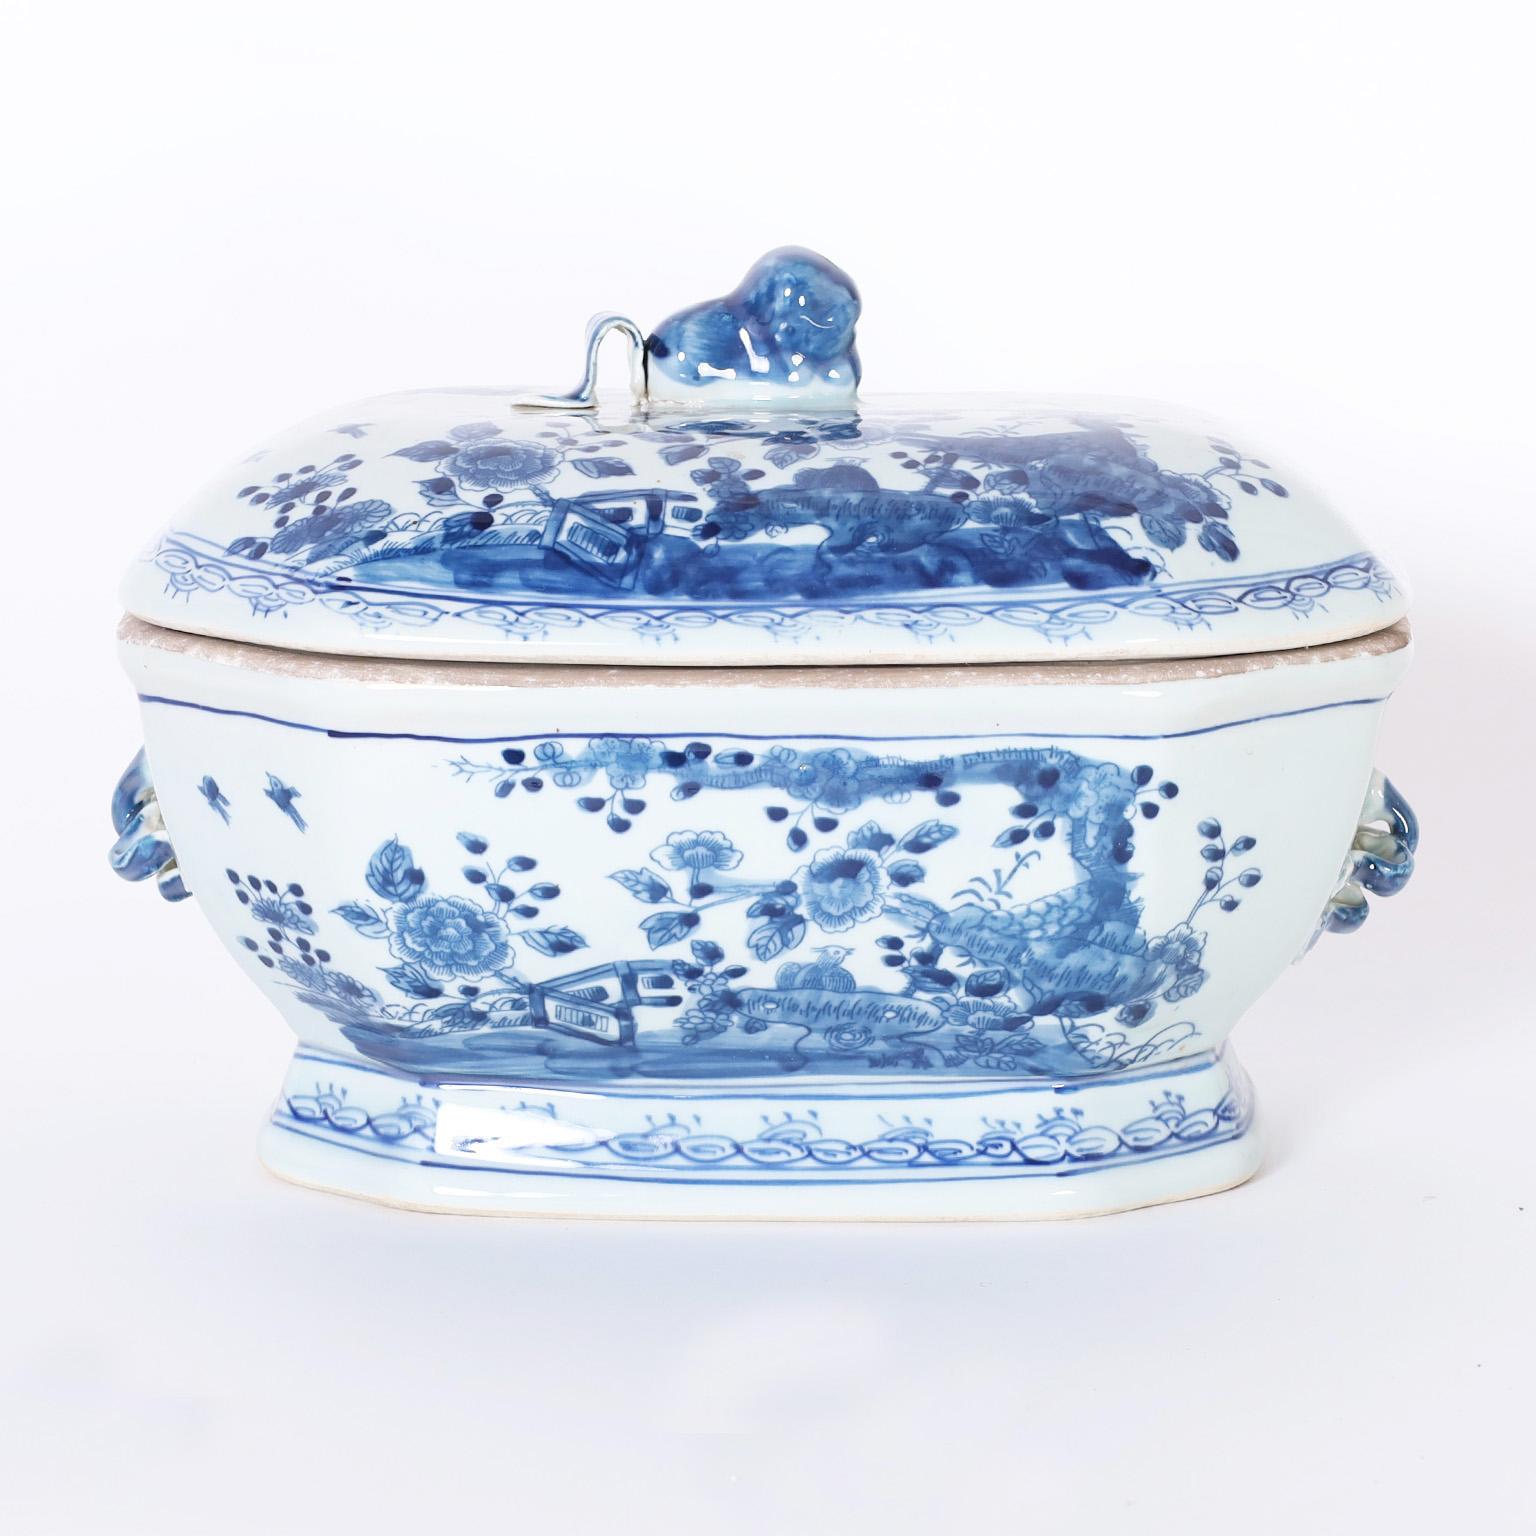 Chinese blue and white porcelain lidded bowl or tureen hand decorated with fauna and flora featuring floral handles on the sides and a figural handle on the top. Two are available.